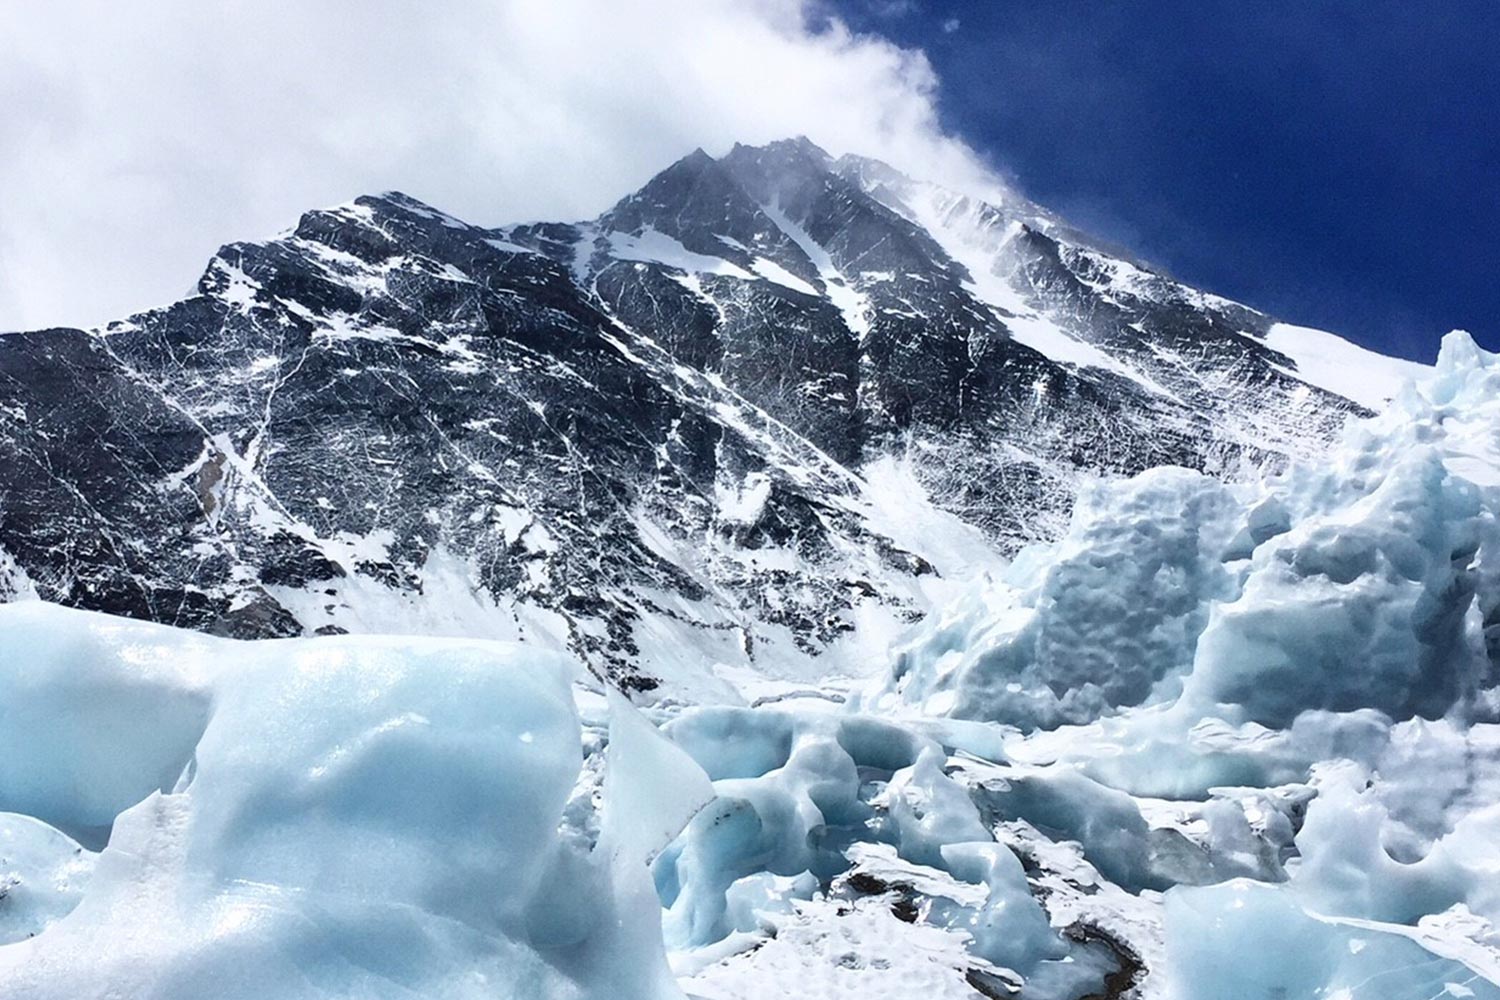 Daytime view depicting the conditions on Mt. Everest. Photo by Mang Lin